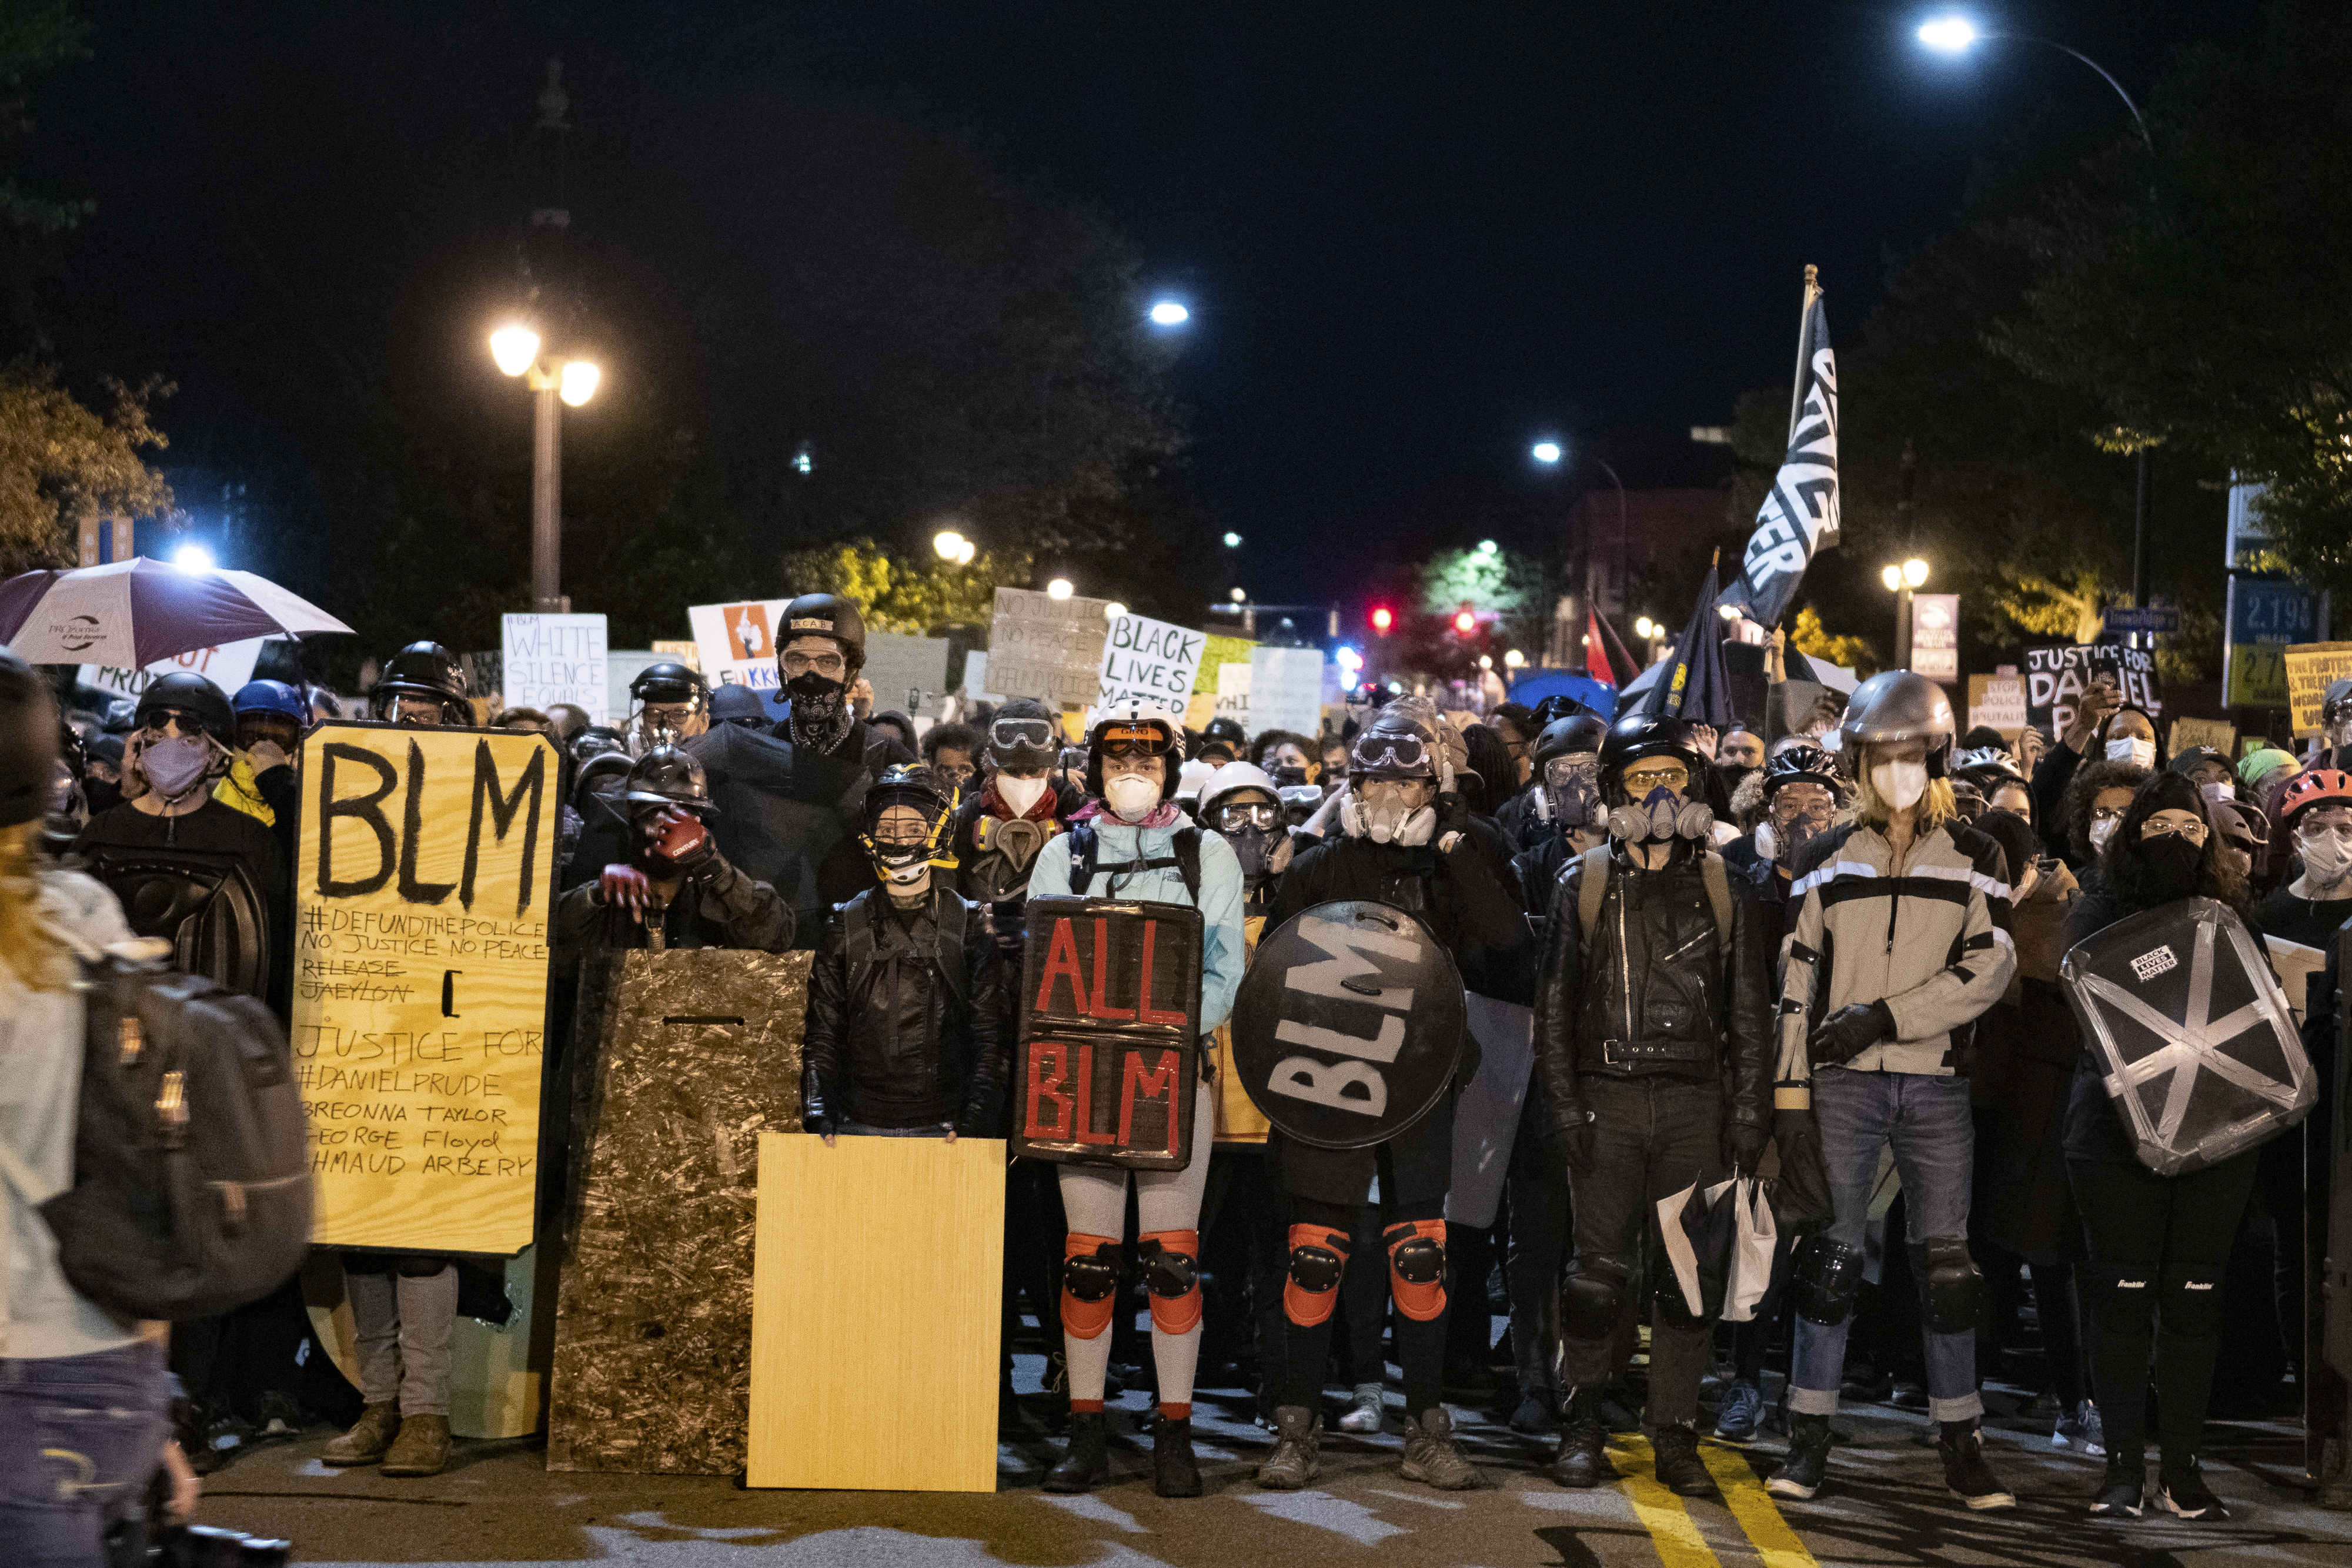 Protesters form a wall as they march to Exchange Boulevard. Demonstrators were equipped with homemade shields, goggles and masks in preparation.